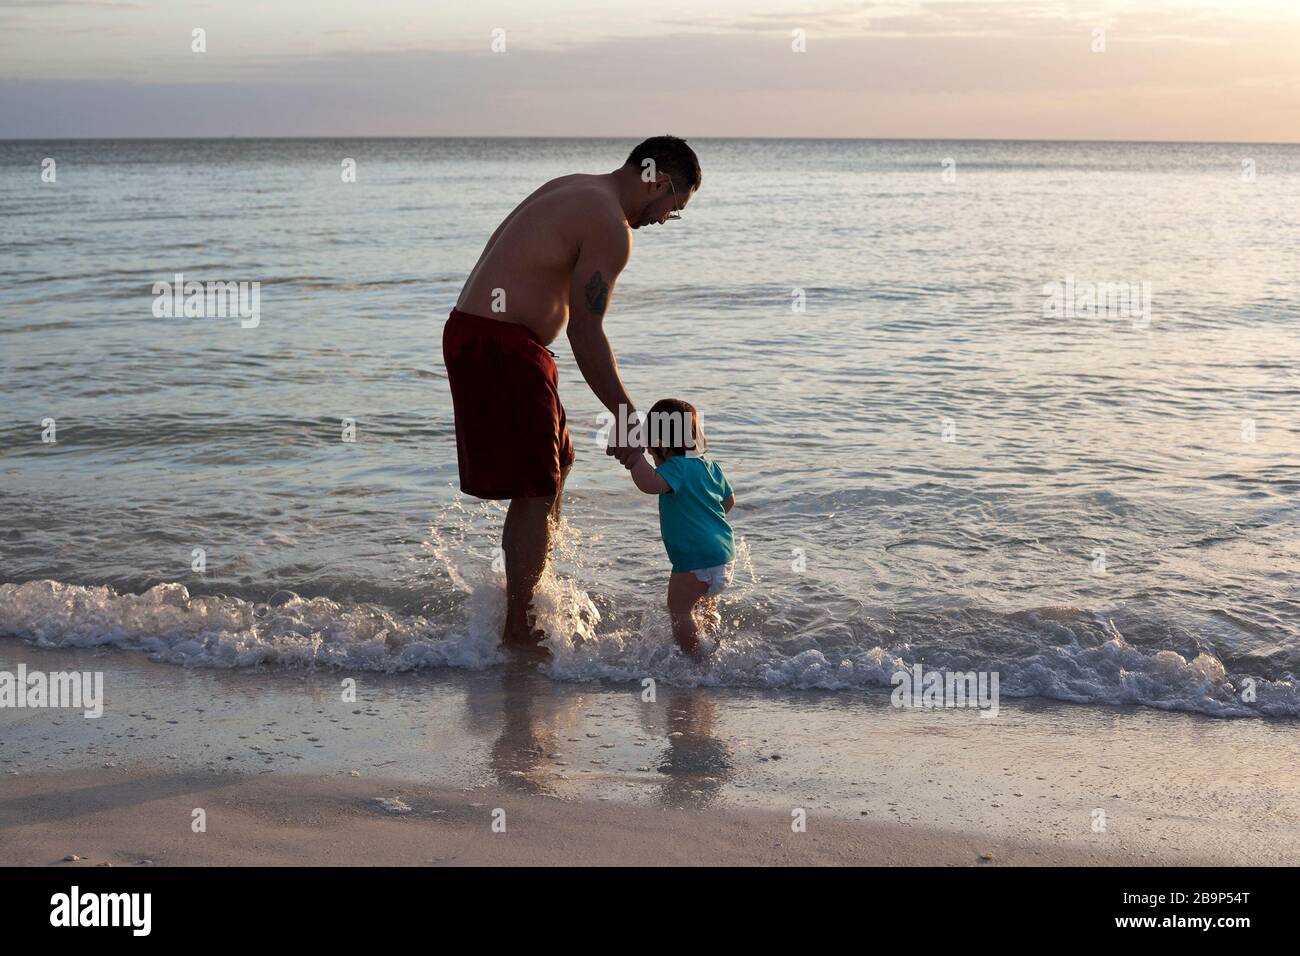 A father and son play in the ocean on Anna Maria Island in Florida, USA. Stock Photo